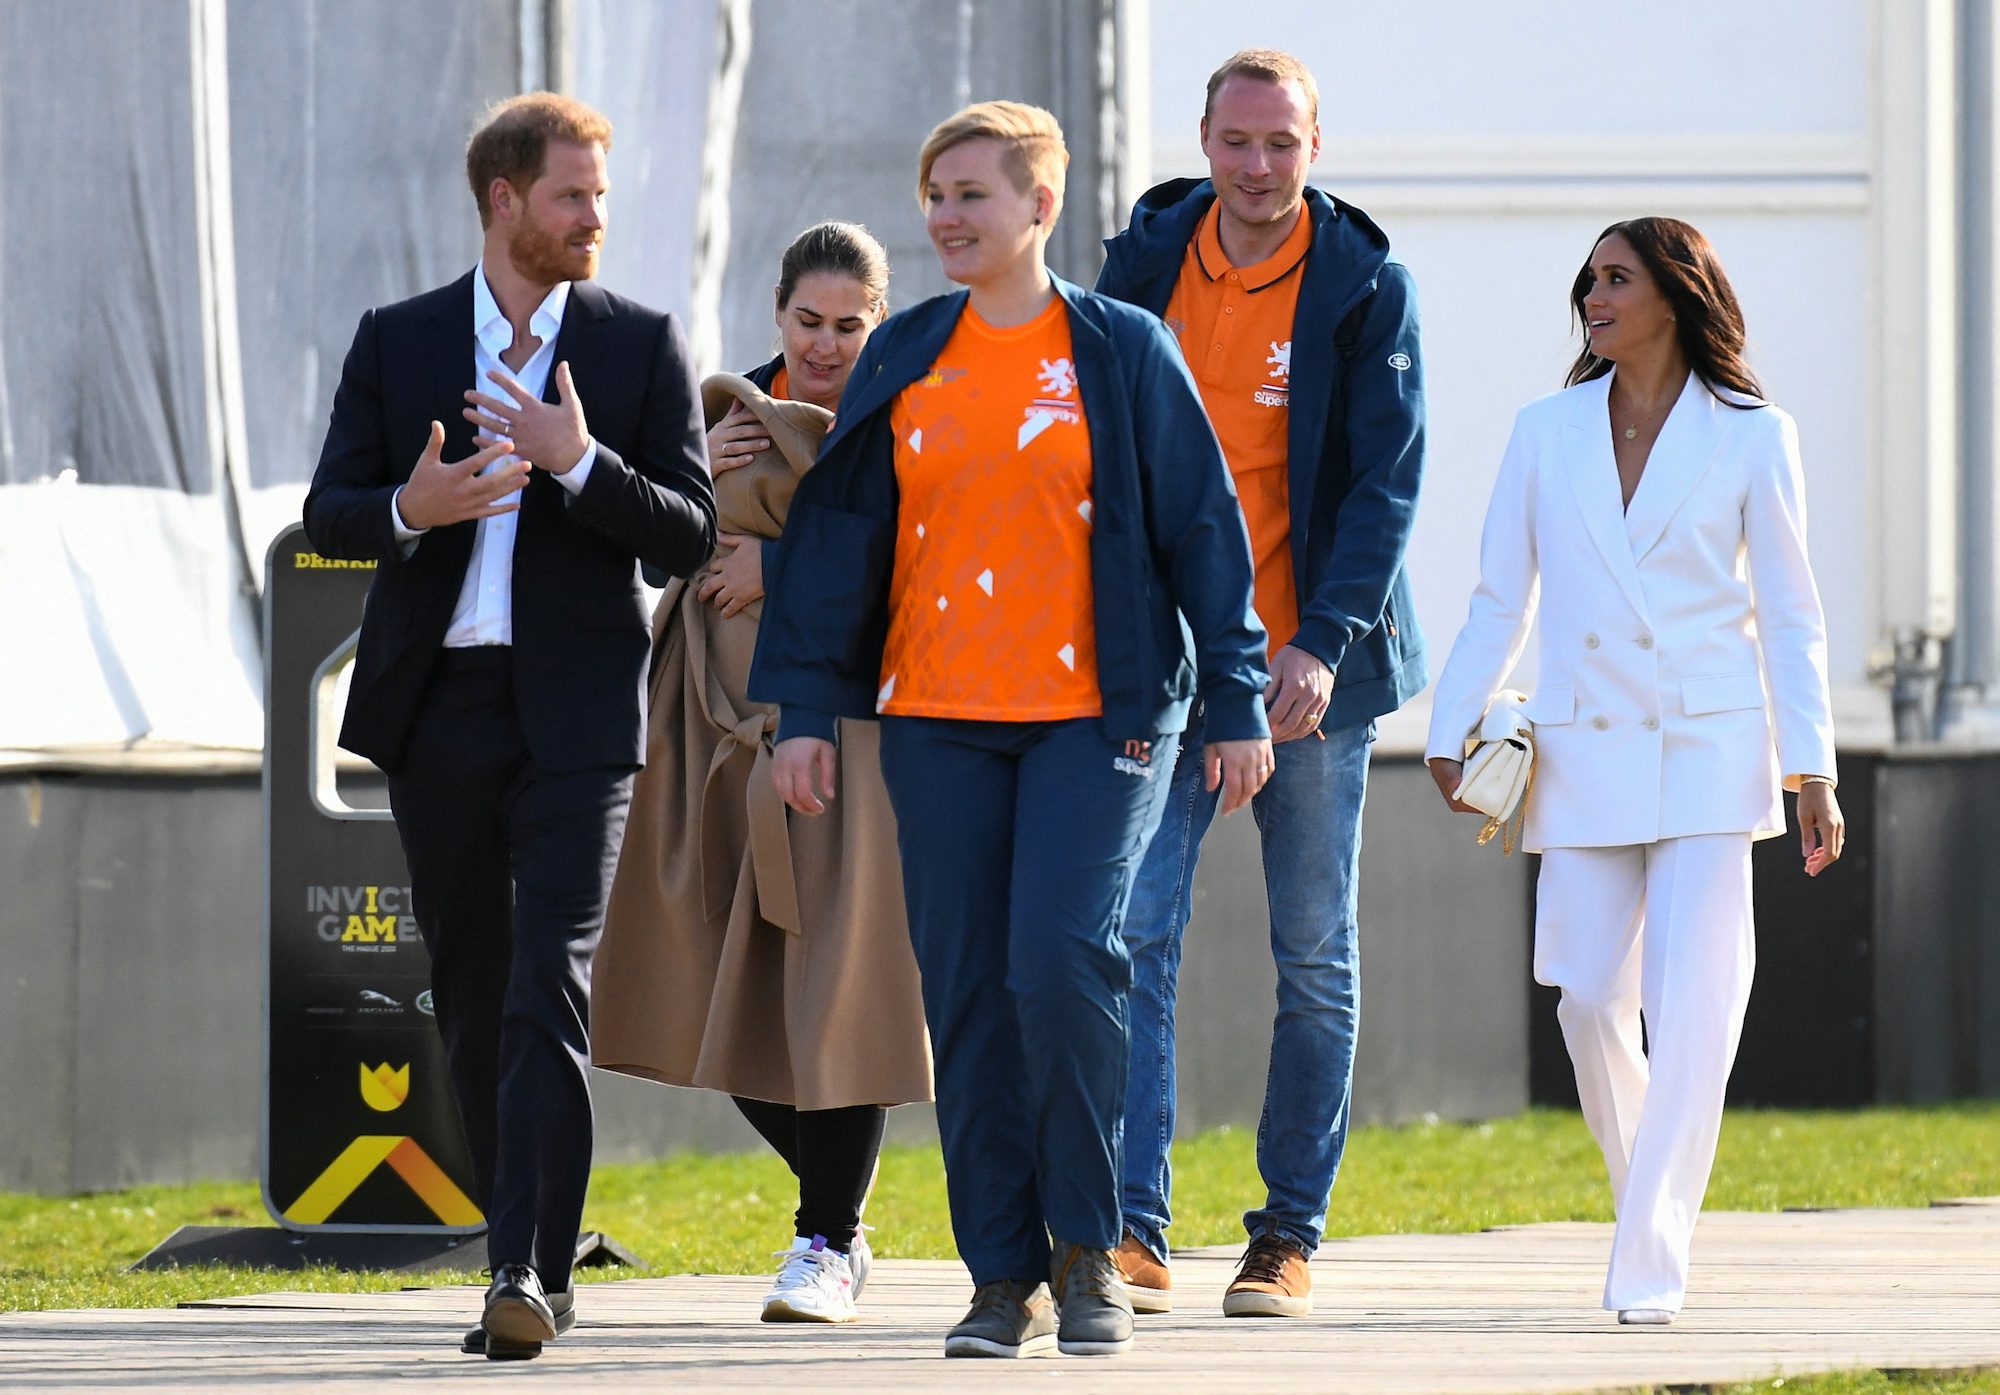 Prince Harry and Meghan, Duchess of Sussex, arrive at the yellow carpet of the Invictus Games to attend the friends and family reception in The Hague, Netherlands April 15, 2022. REUTERS/Piroschka Van De Wouw